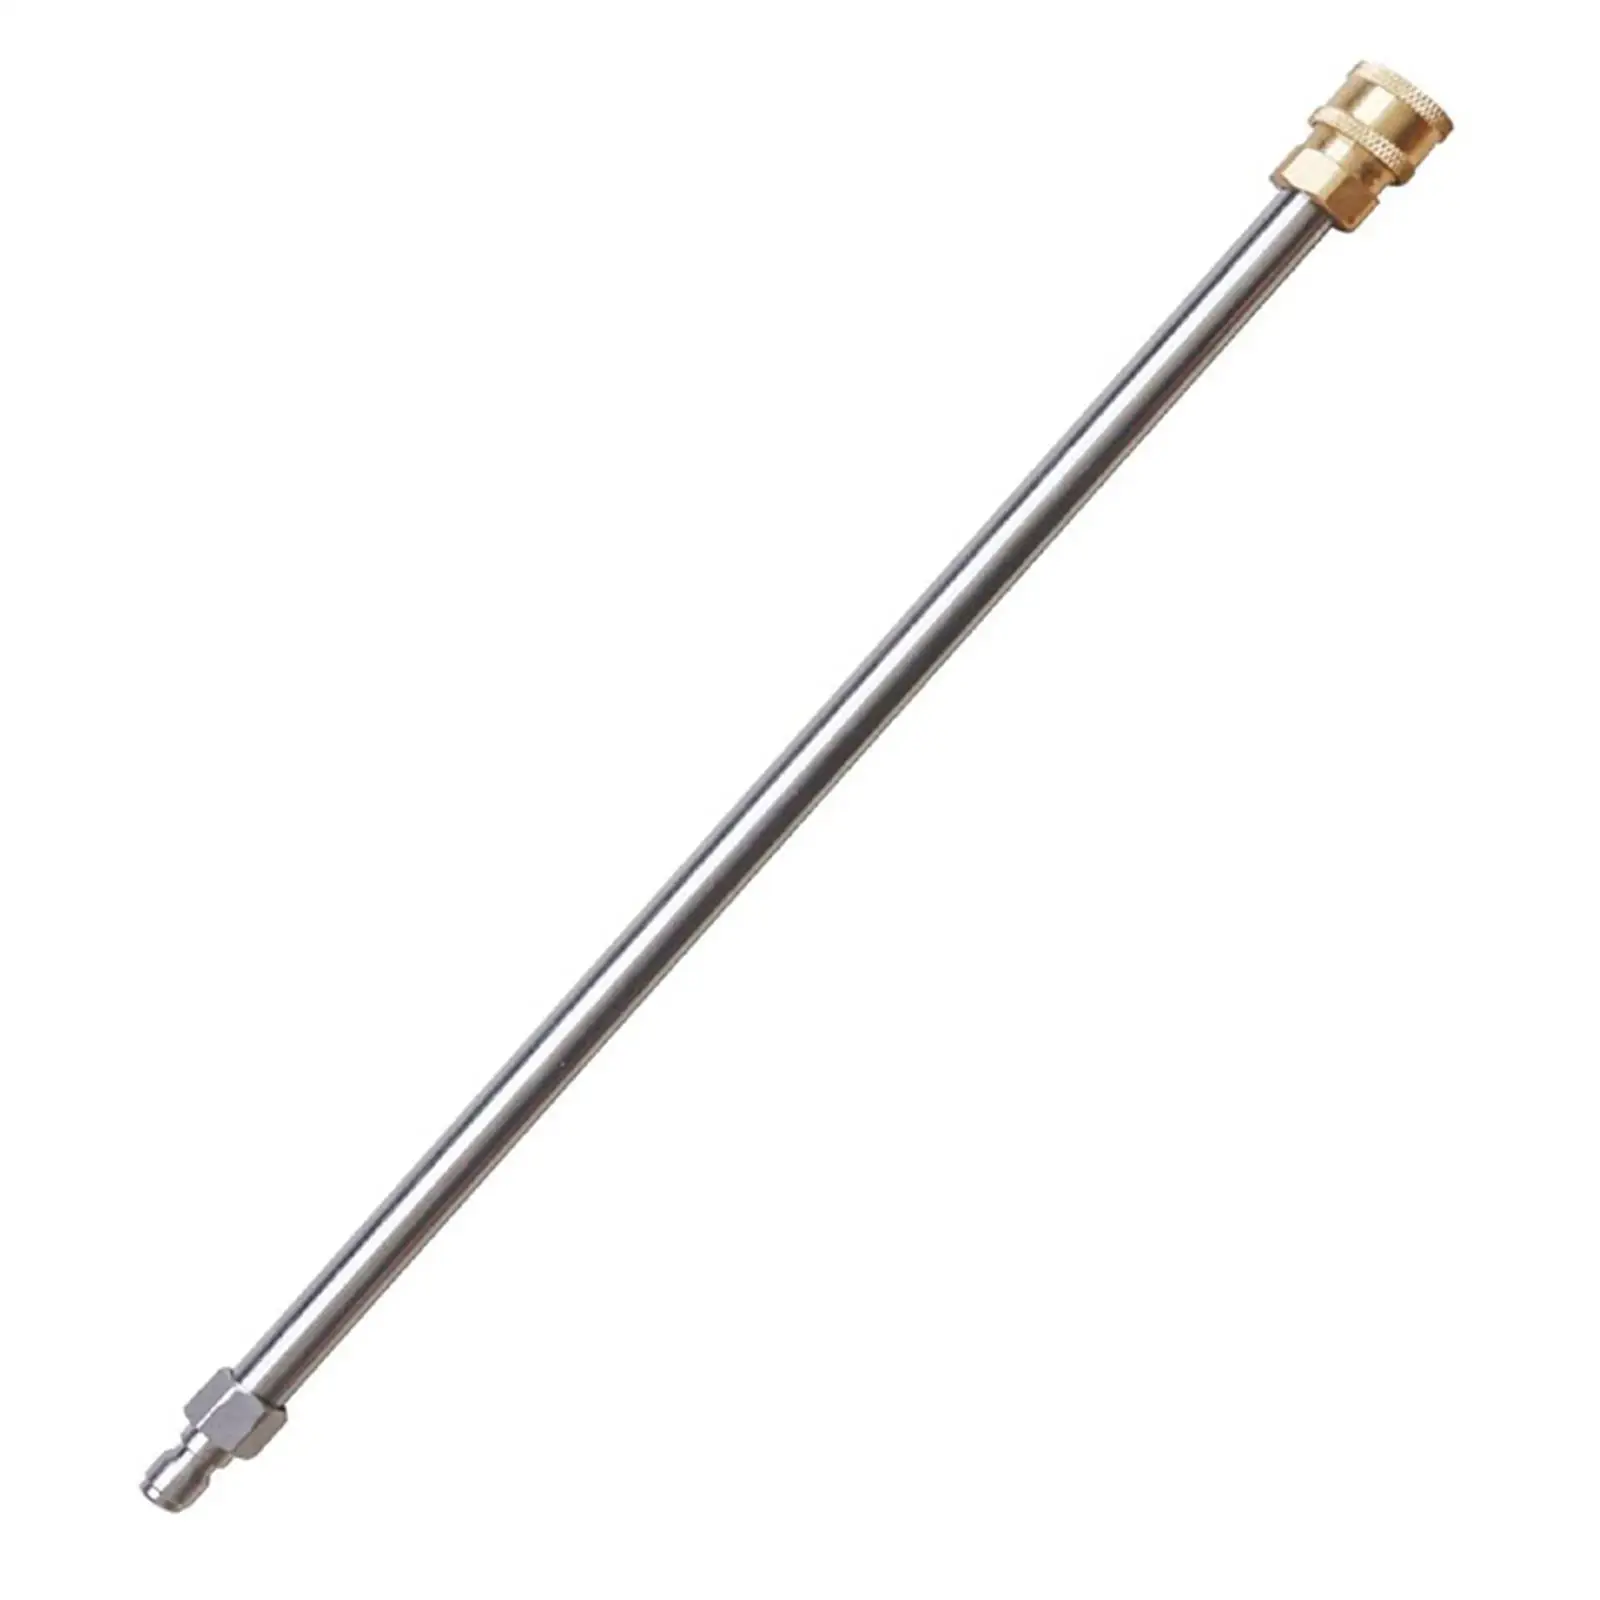 Pressure Washer Extension Wand, 17 Inch Stainless Steel 1/4 Inch Quick Connect Power Washer Lance